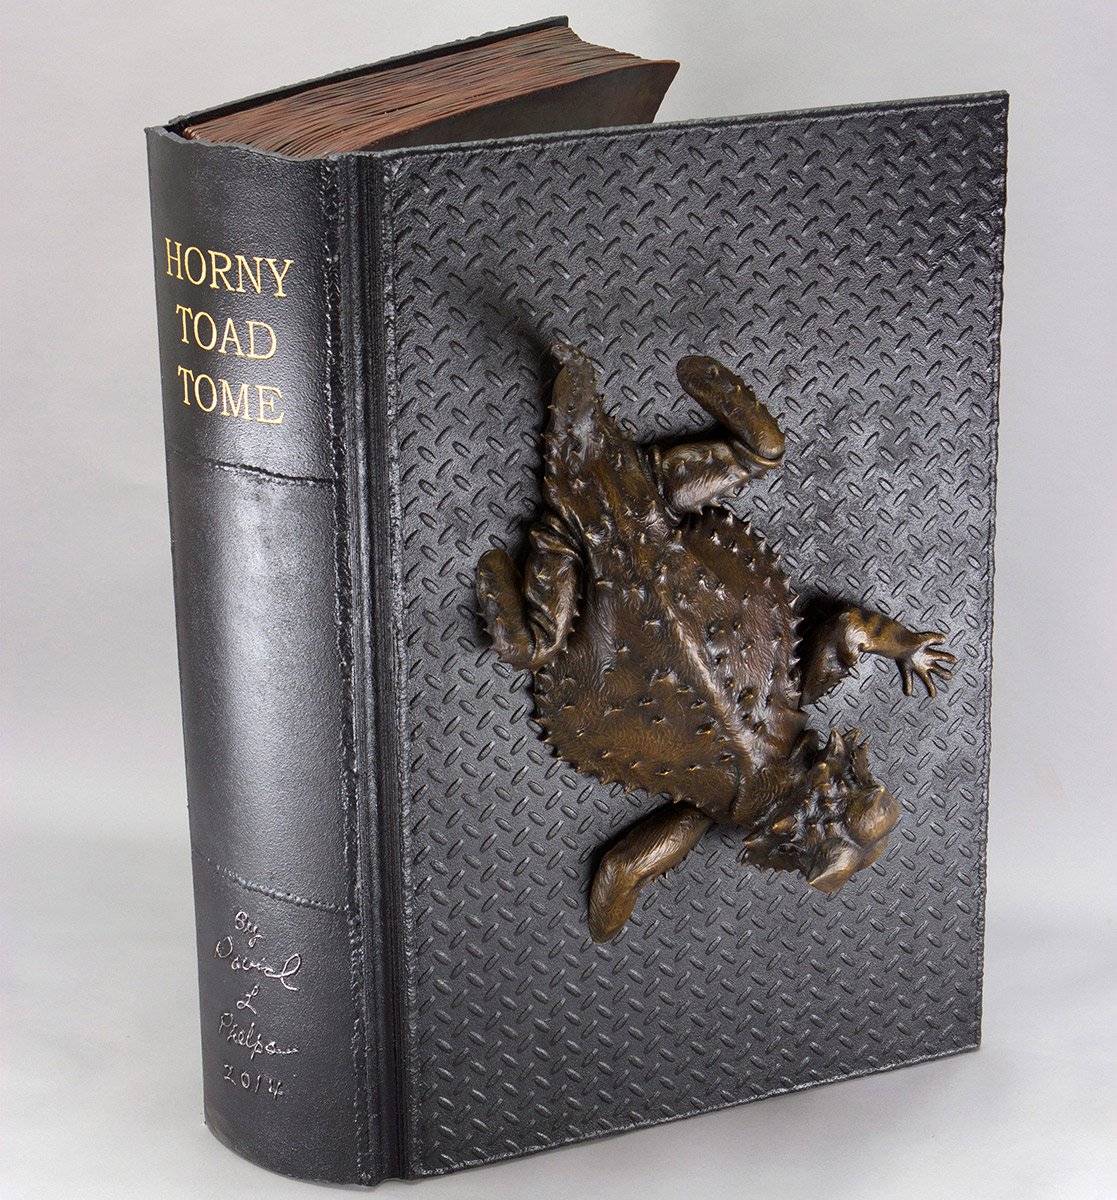 Horny Toad Tome